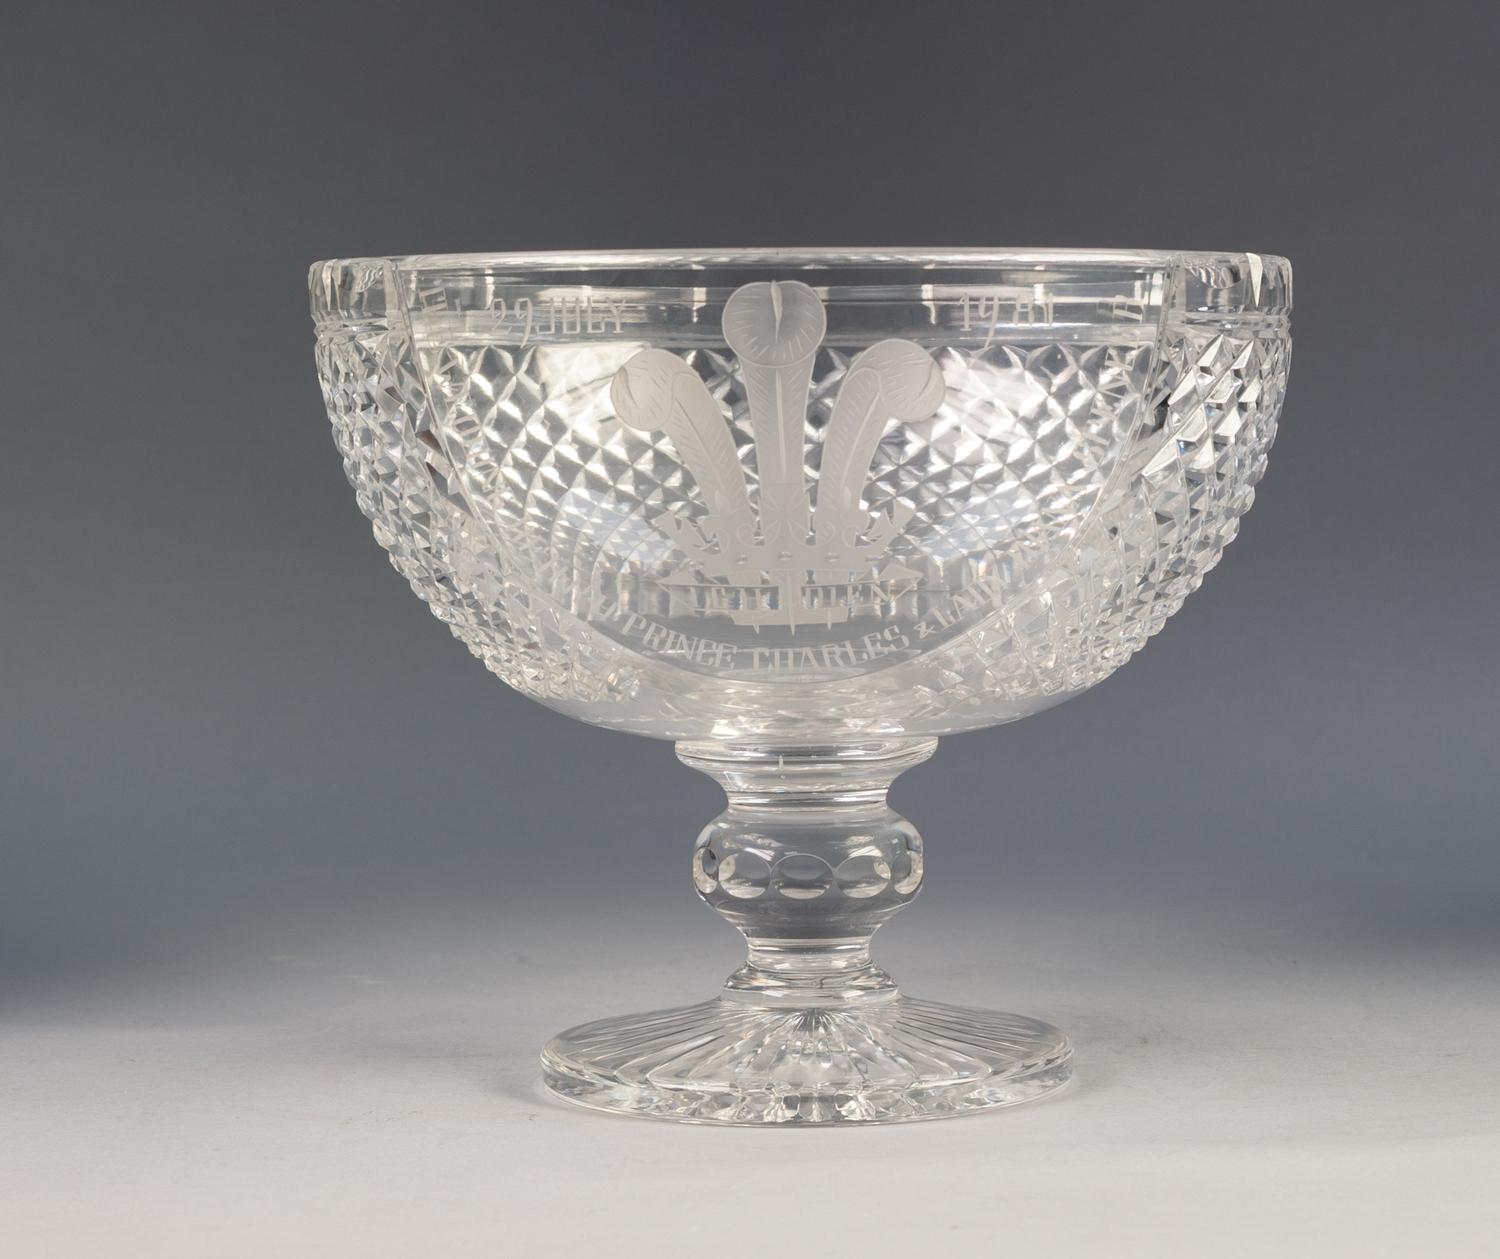 BOXED STUART CRYSTAL LIMITED EDITION, CHARLES AND DIANA, ROYAL COMMEMORATIVE LARGE CHALICE, wheel